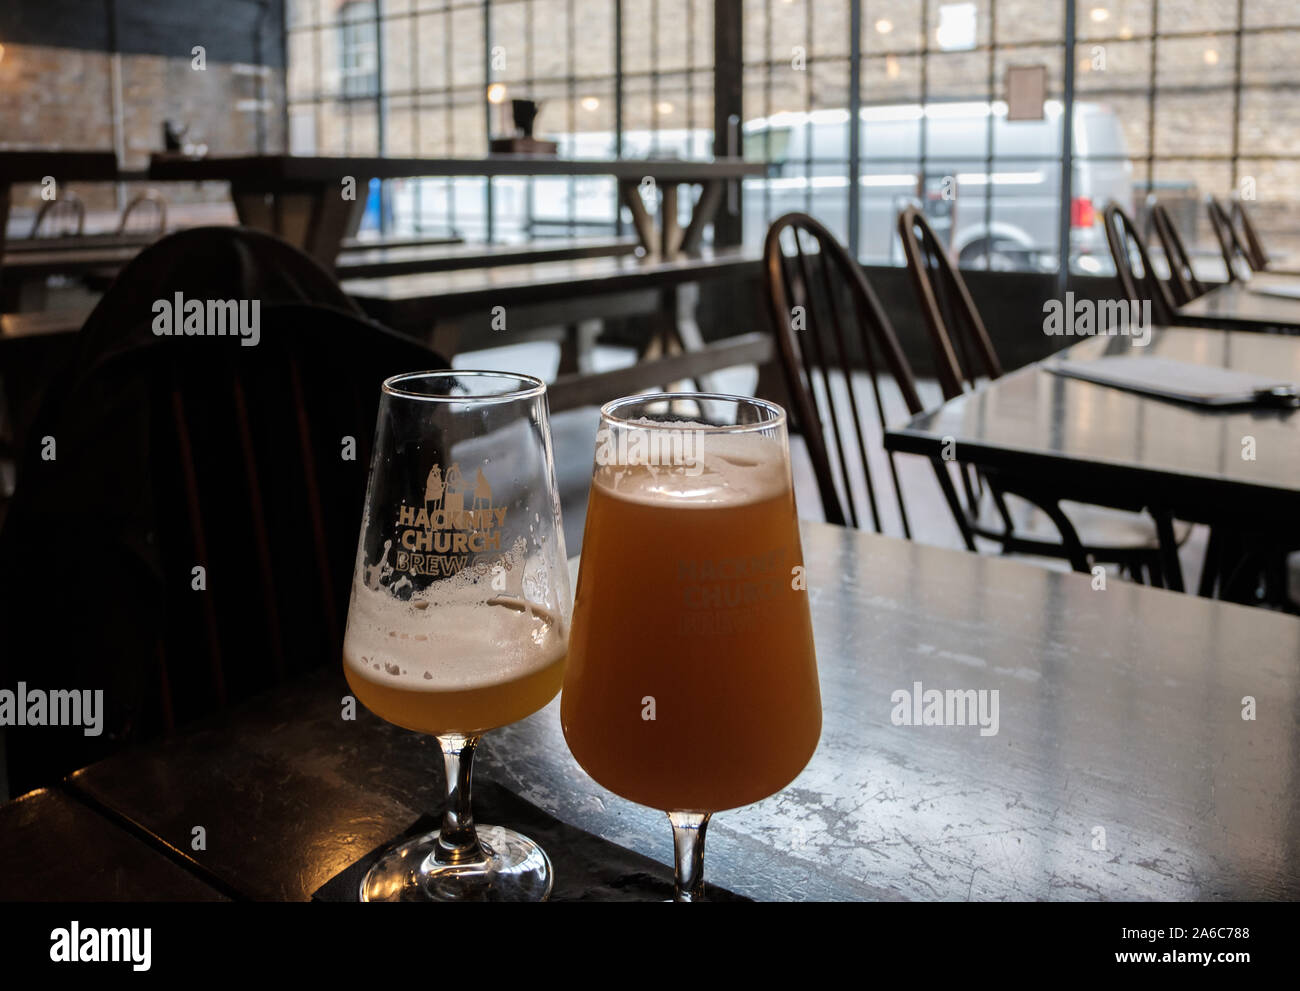 Glasses of Joosy Pale Ale at the Hackney Church Brew Co, a microwbrewery under the railway arches at Bohemia Place, Hackney, East London Stock Photo